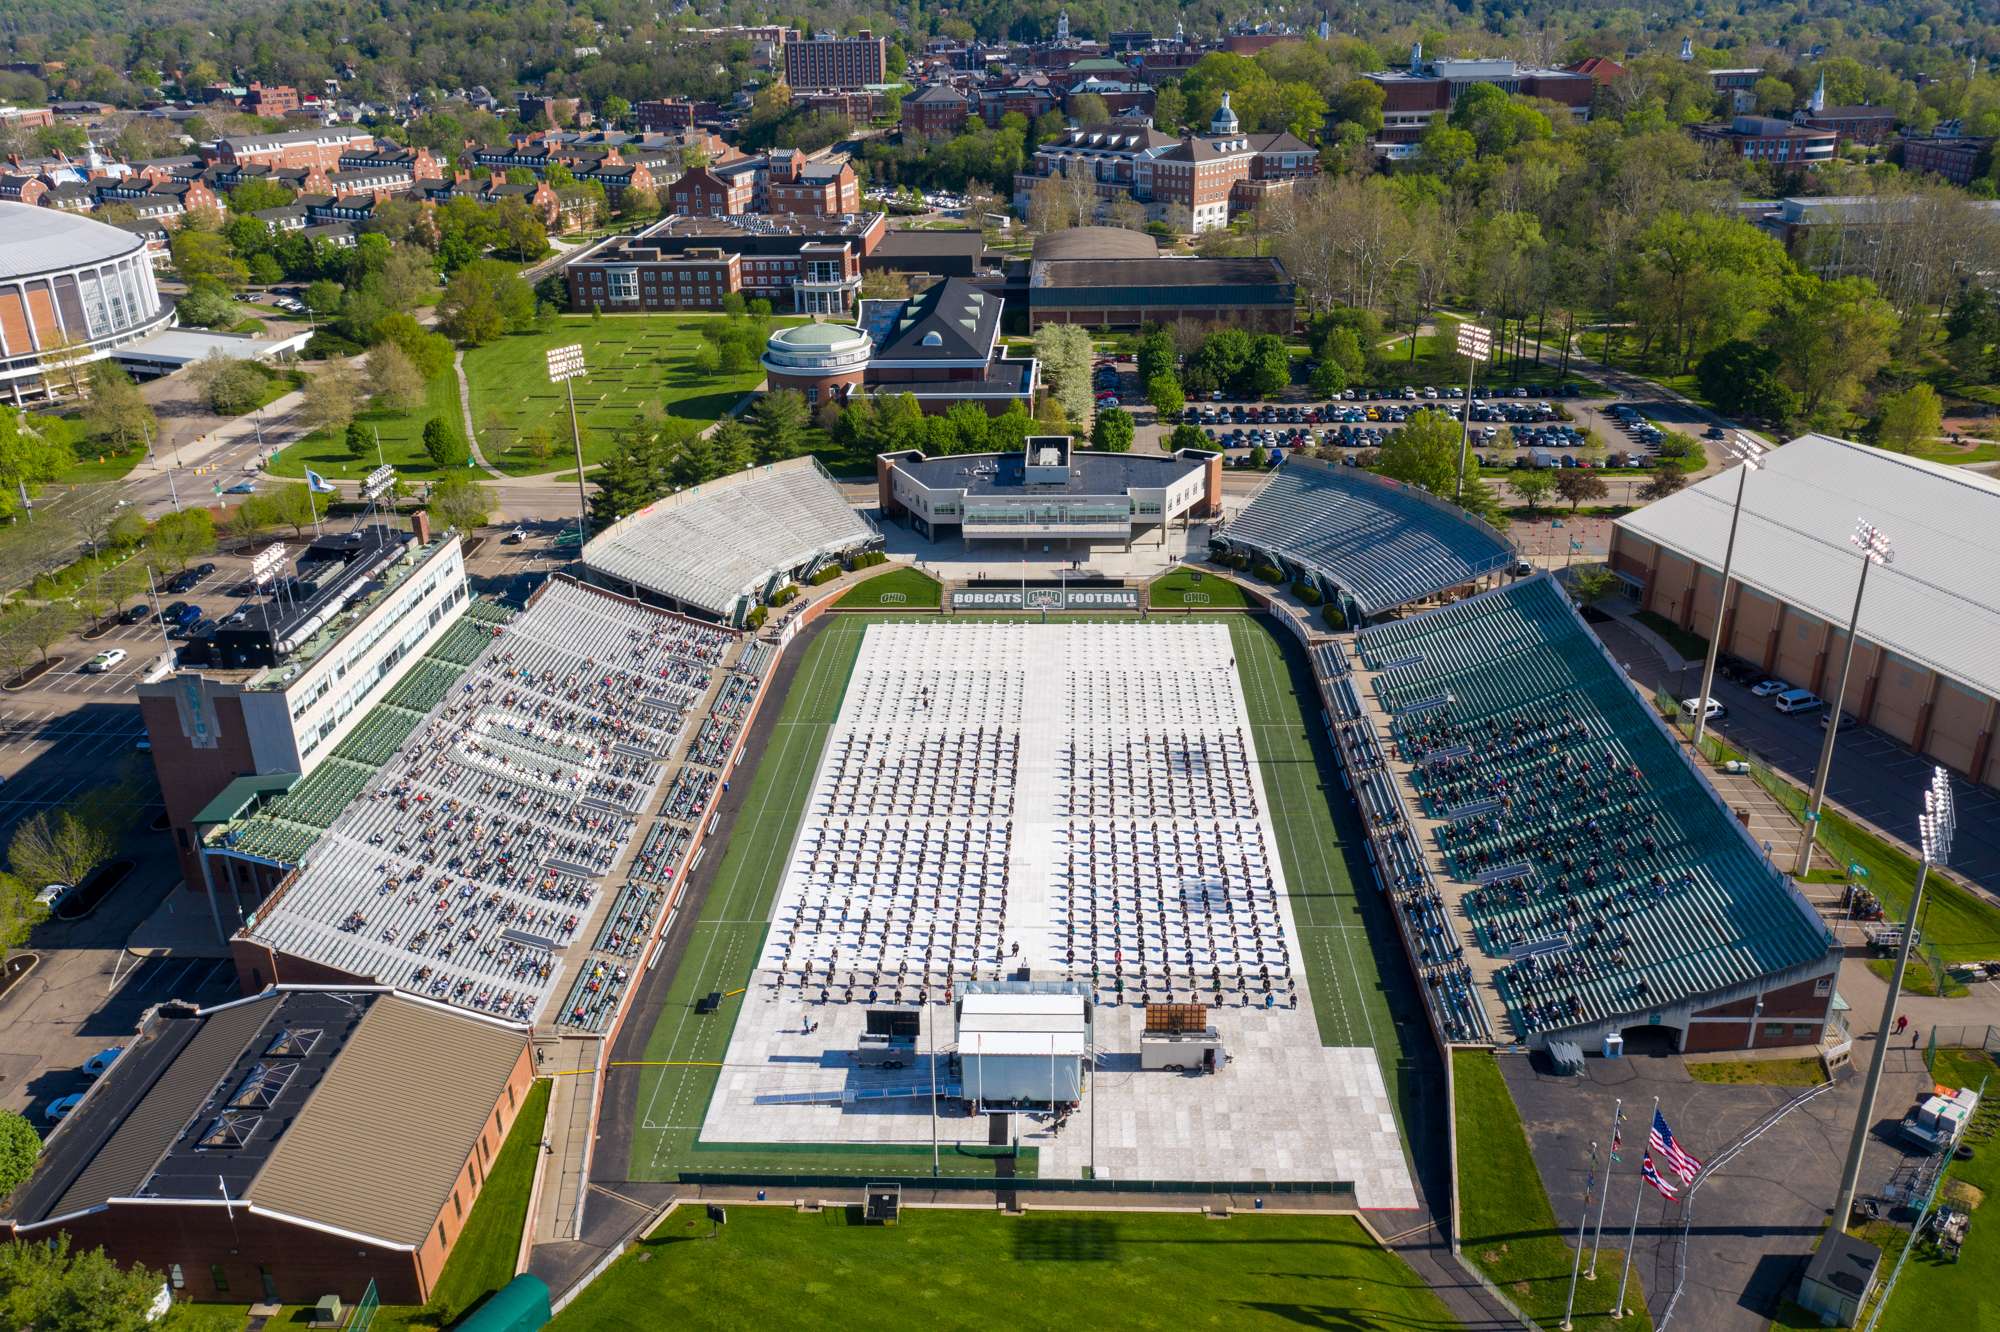 An aerial view of the Ohio University Peden Stadium where the 2021 Spring Commencement ceremony was held